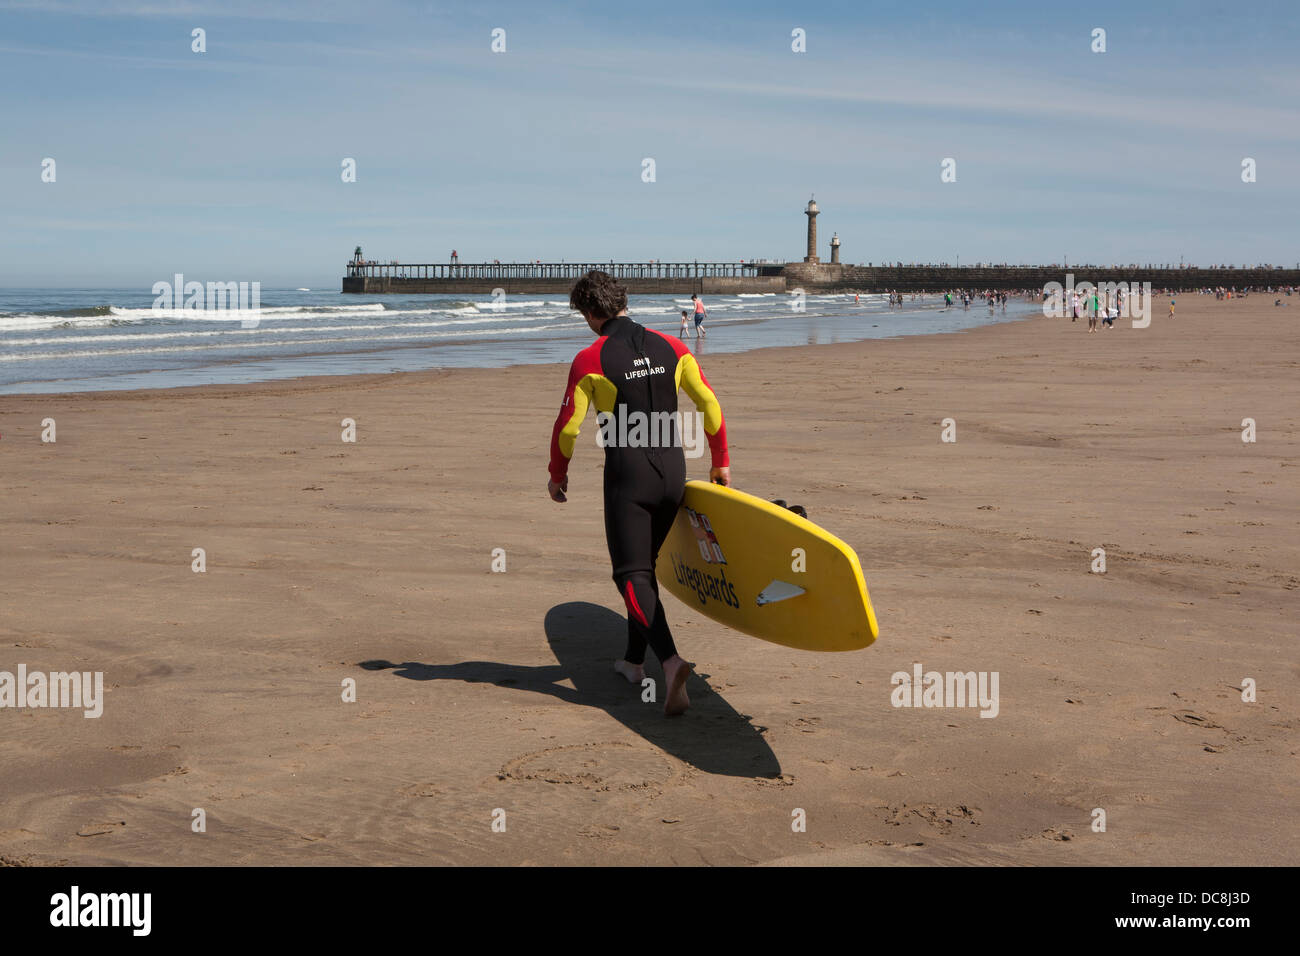 A RNLI Life guard running across the sandy beach towards the sea with a surf board under his arm, Whitby, Yorkshire. Stock Photo